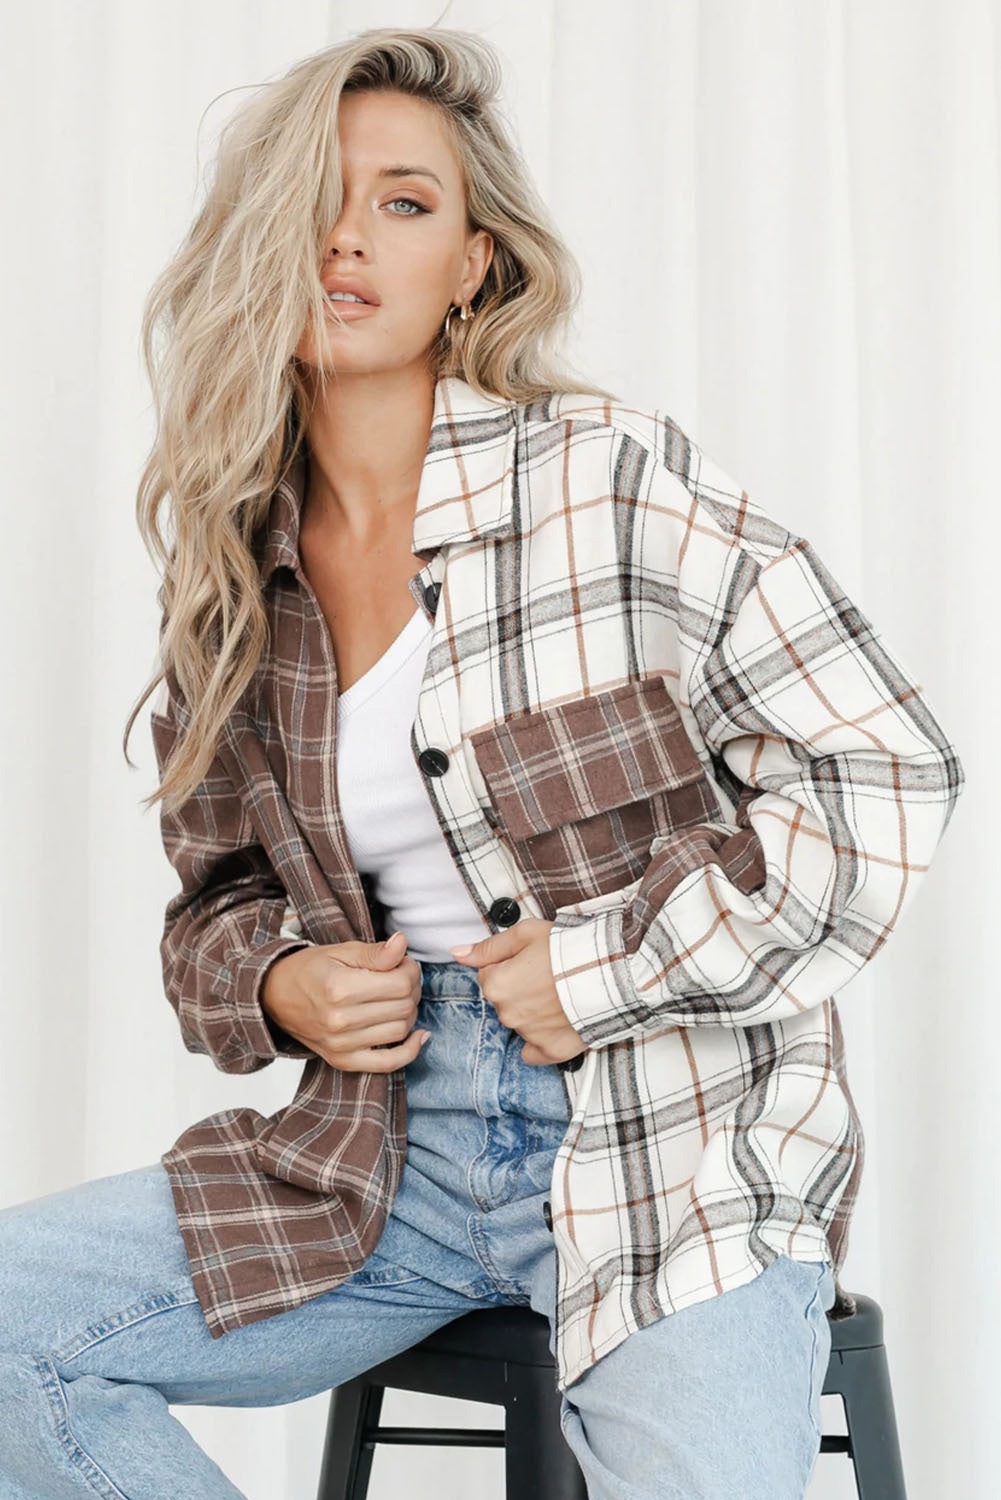 Cali Chic Brown Mixed Plaid Soft Oversized Shirt